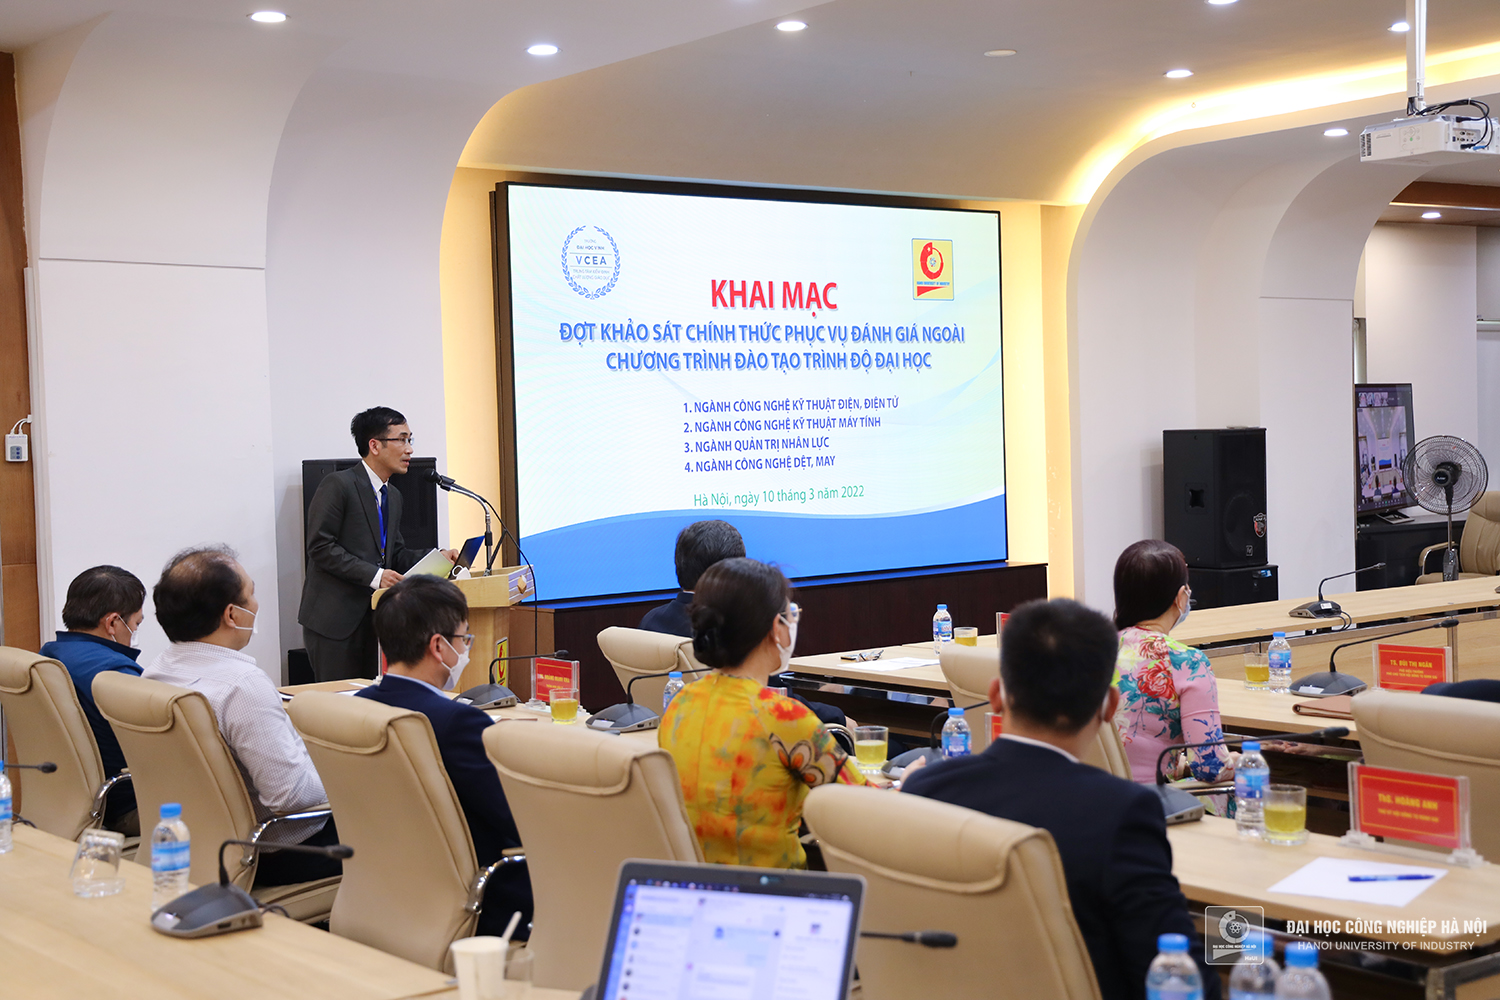 Opening Ceremony of the External Evaluation of 04 training programs: Electrical Engineering Technology, Computer Engineering Technology, Human Resource Management, Garment and Textile Technology